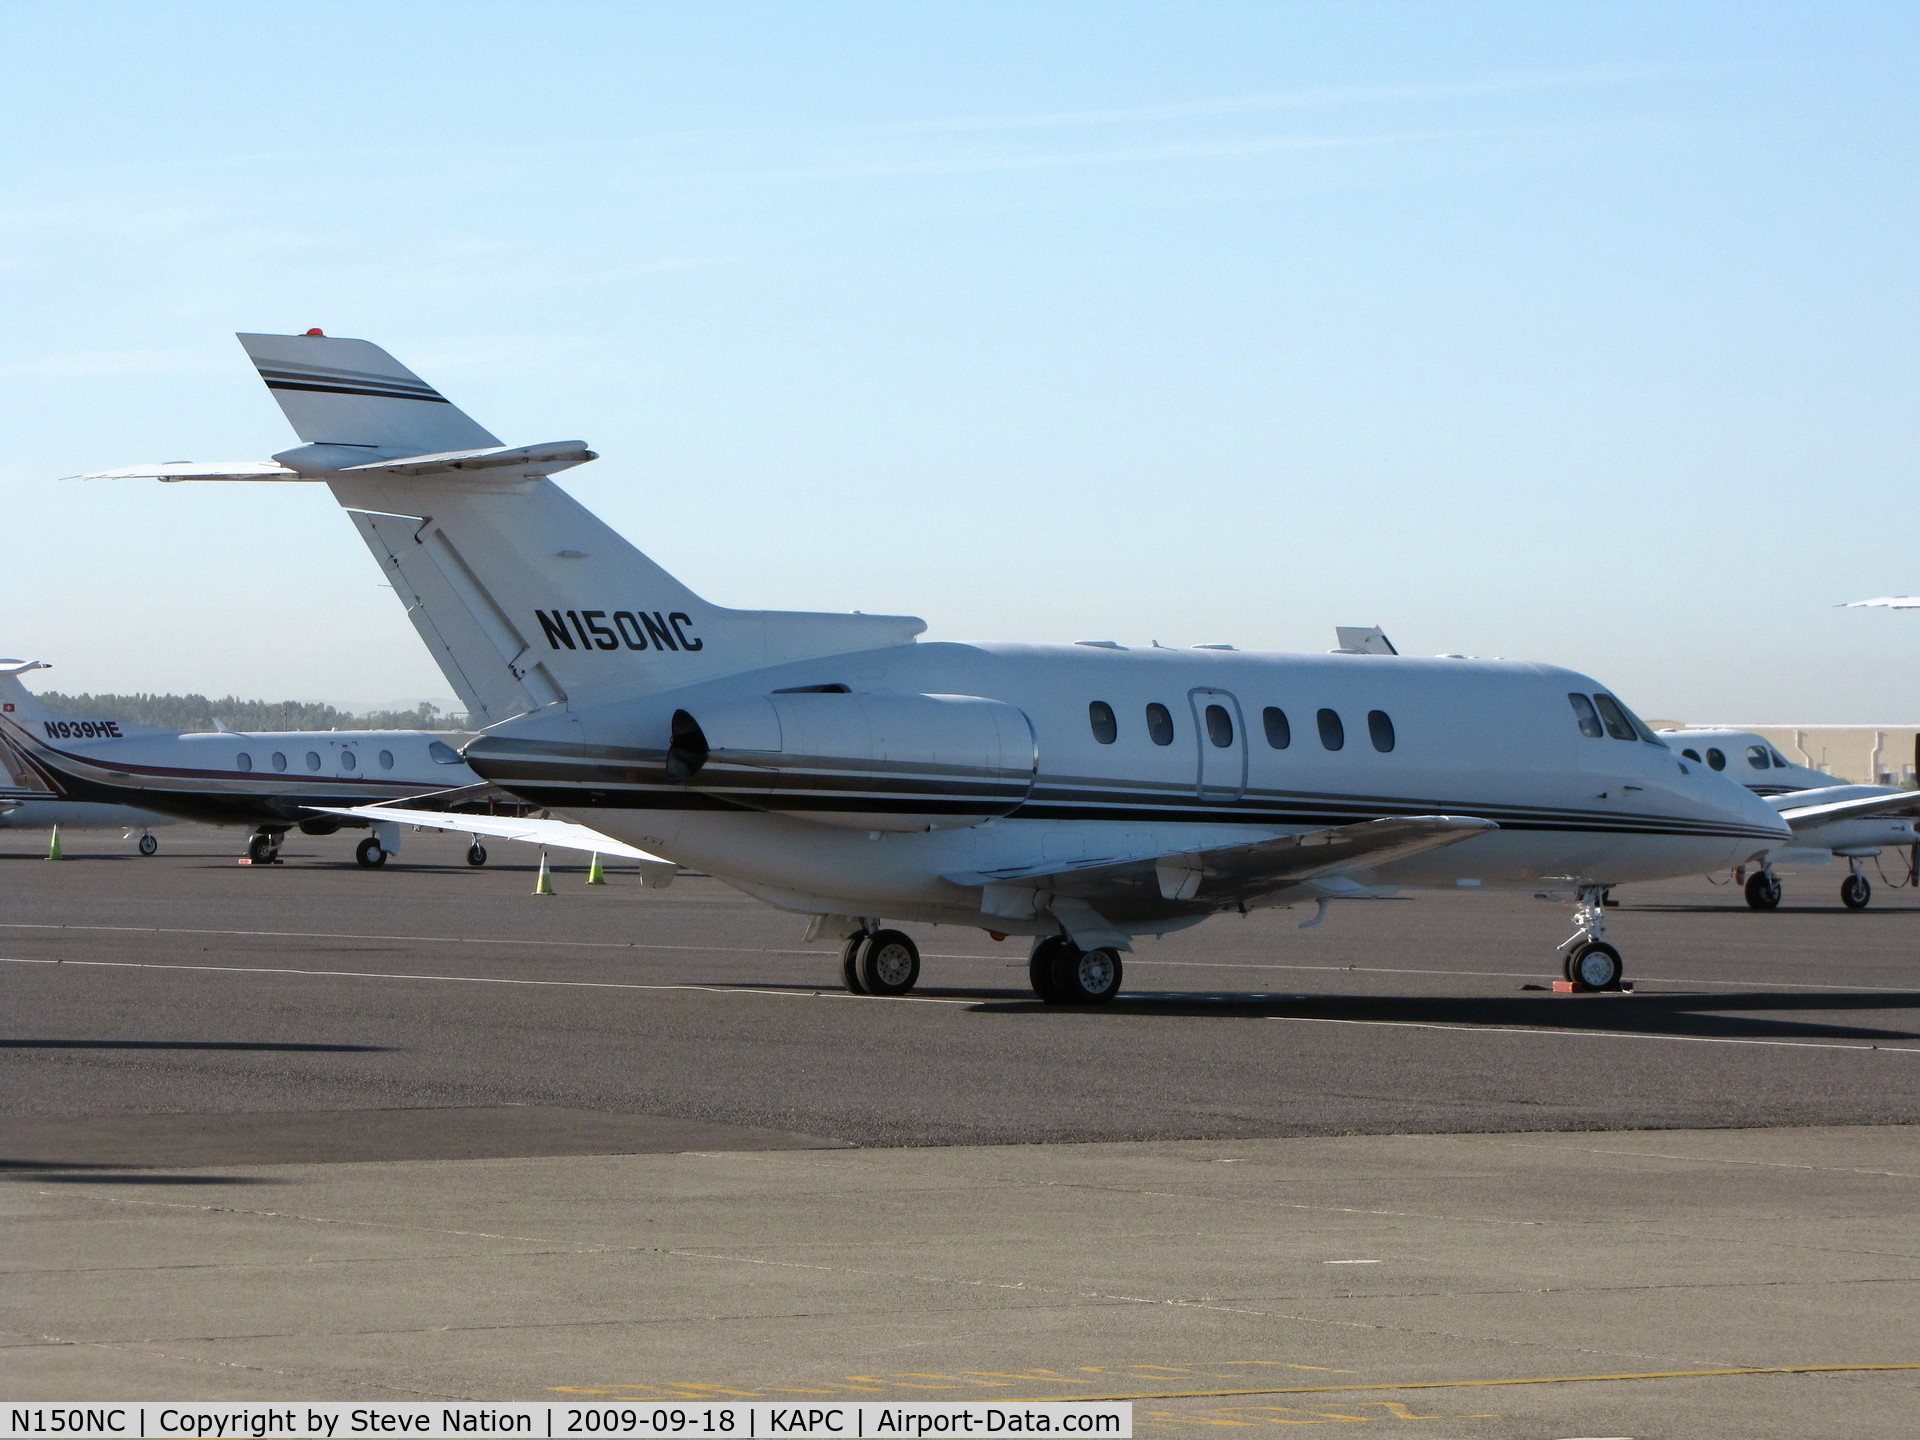 N150NC, 1996 Raytheon Hawker 800XP C/N 258293, former Circuit City Stores 1996 Raytheon Corporate Jets Inc HAWKER 800XP visiting wine country